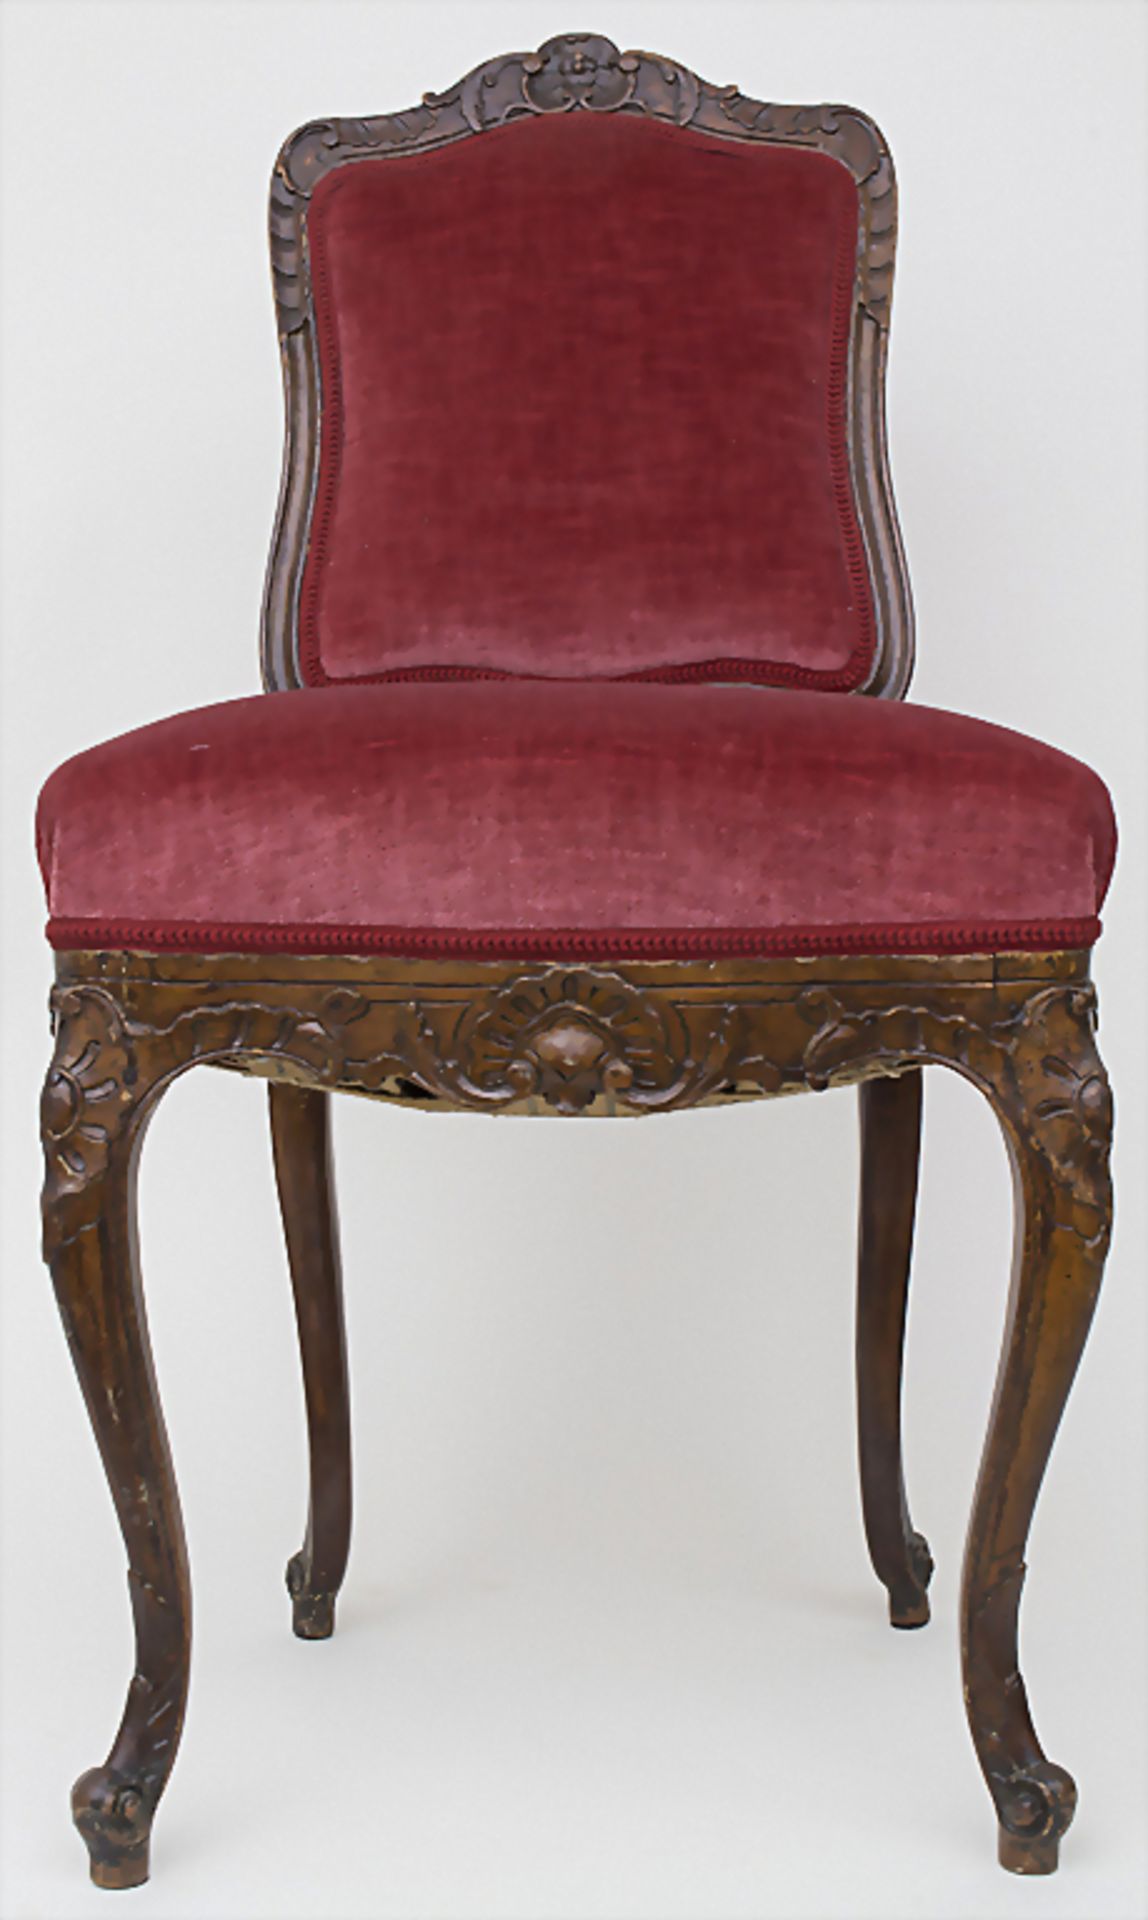 Rokoko-Stuhl mit Rocaillendekor / A Rococo chair with rocaillesMaterial: Holz, geschni